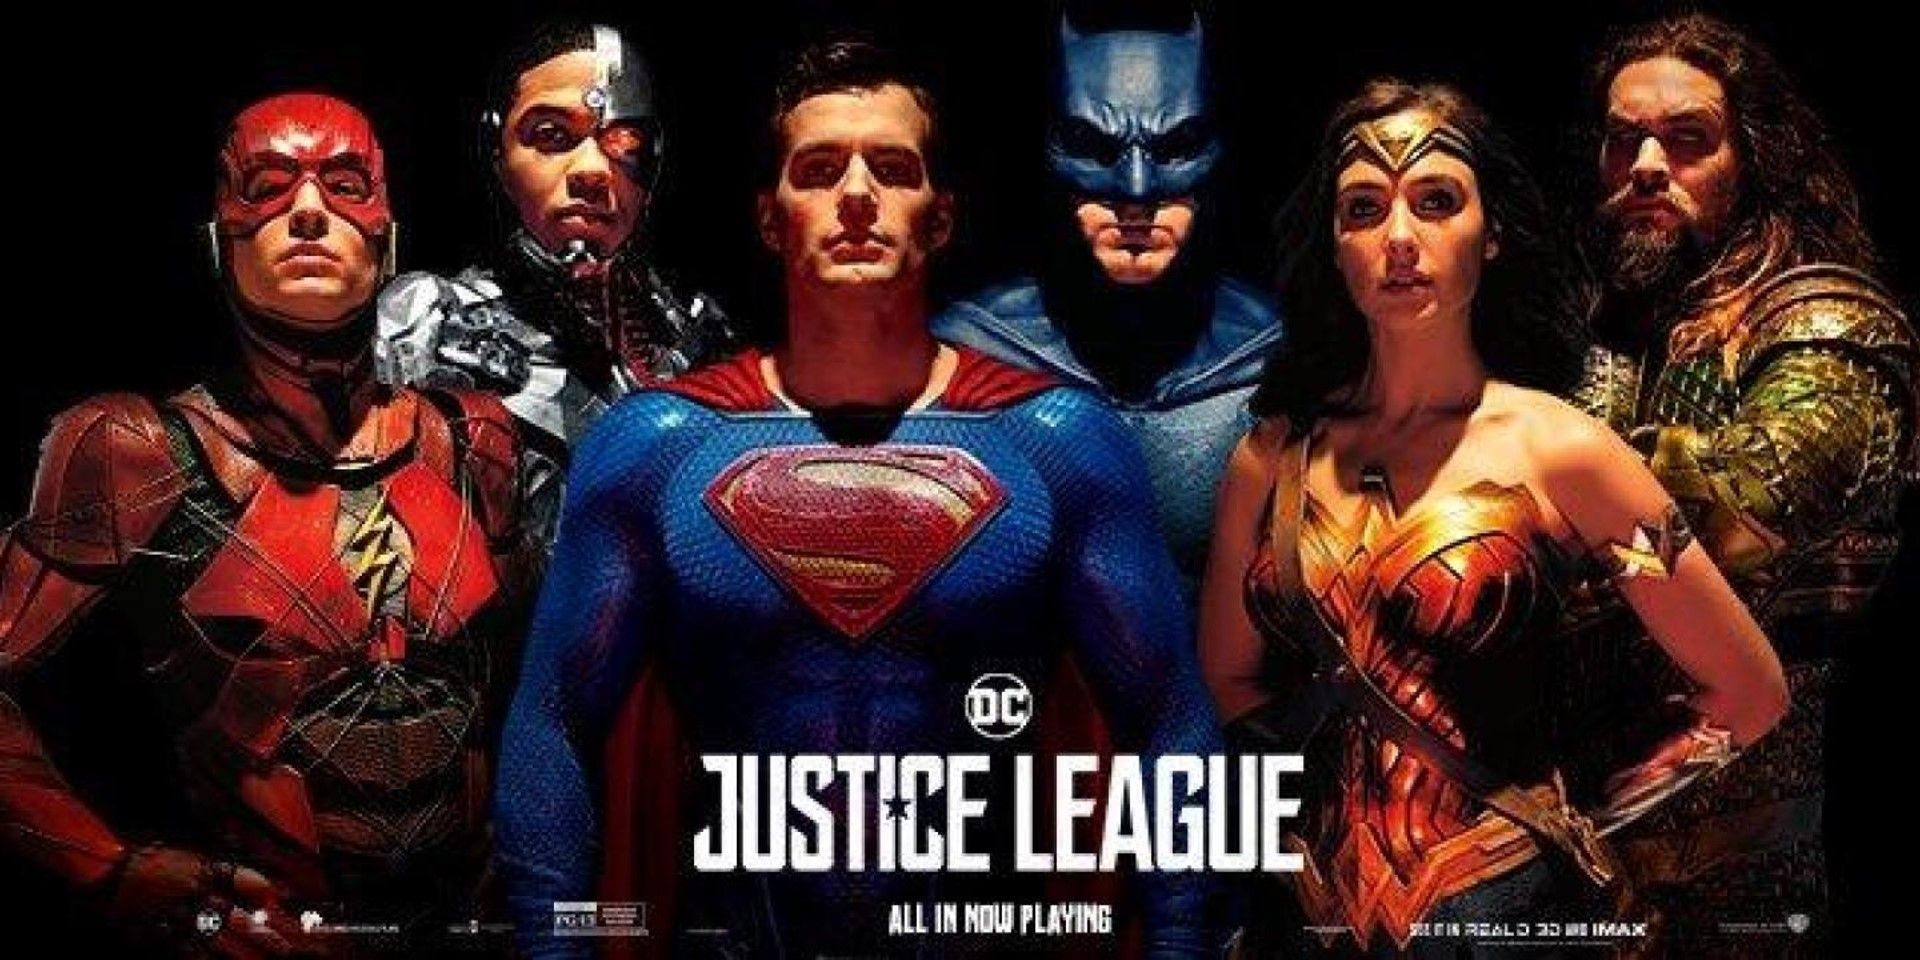 DC's Justice League 2017 promotional movie banner